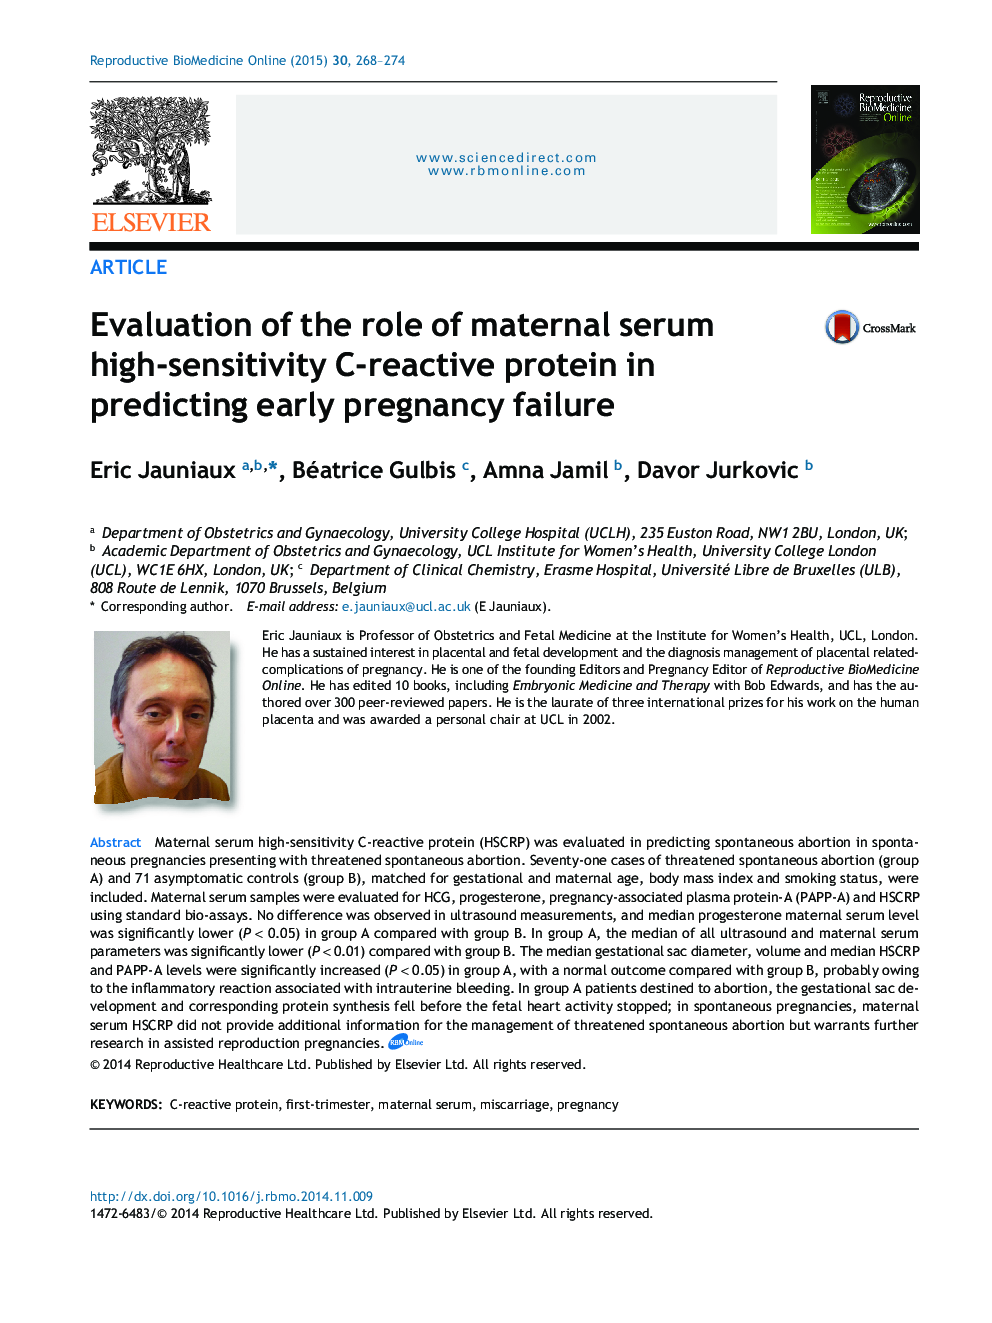 Evaluation of the role of maternal serum high-sensitivity C-reactive protein in predicting early pregnancy failure